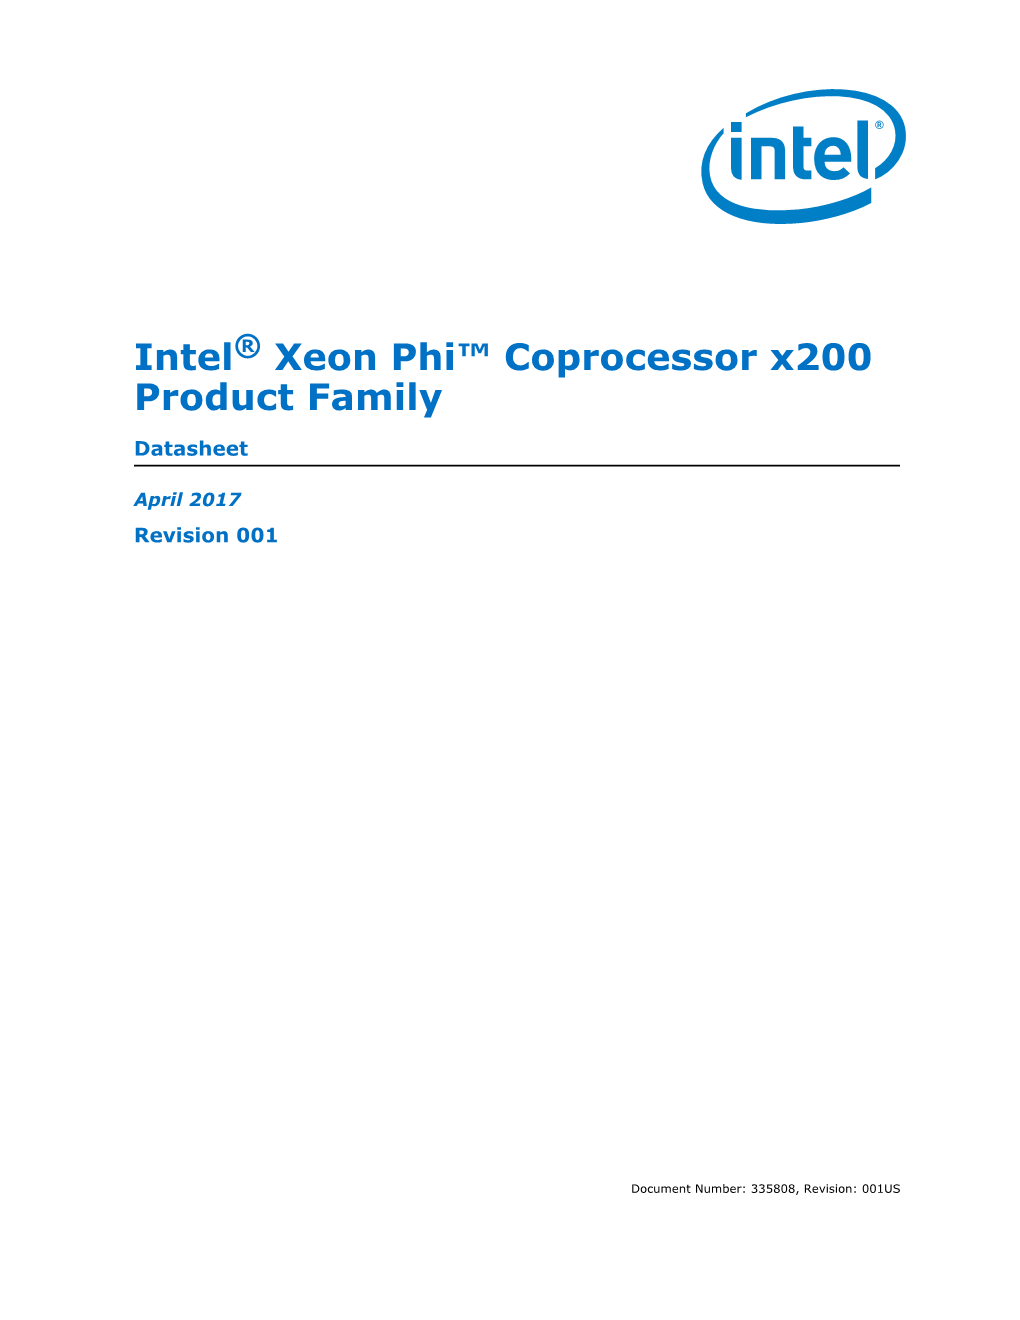 Intel® Xeon Phi™ Coprocessor X200 Product Family Datasheet April 2017 2 Document Number: 335808, Revision: 001US Revision History